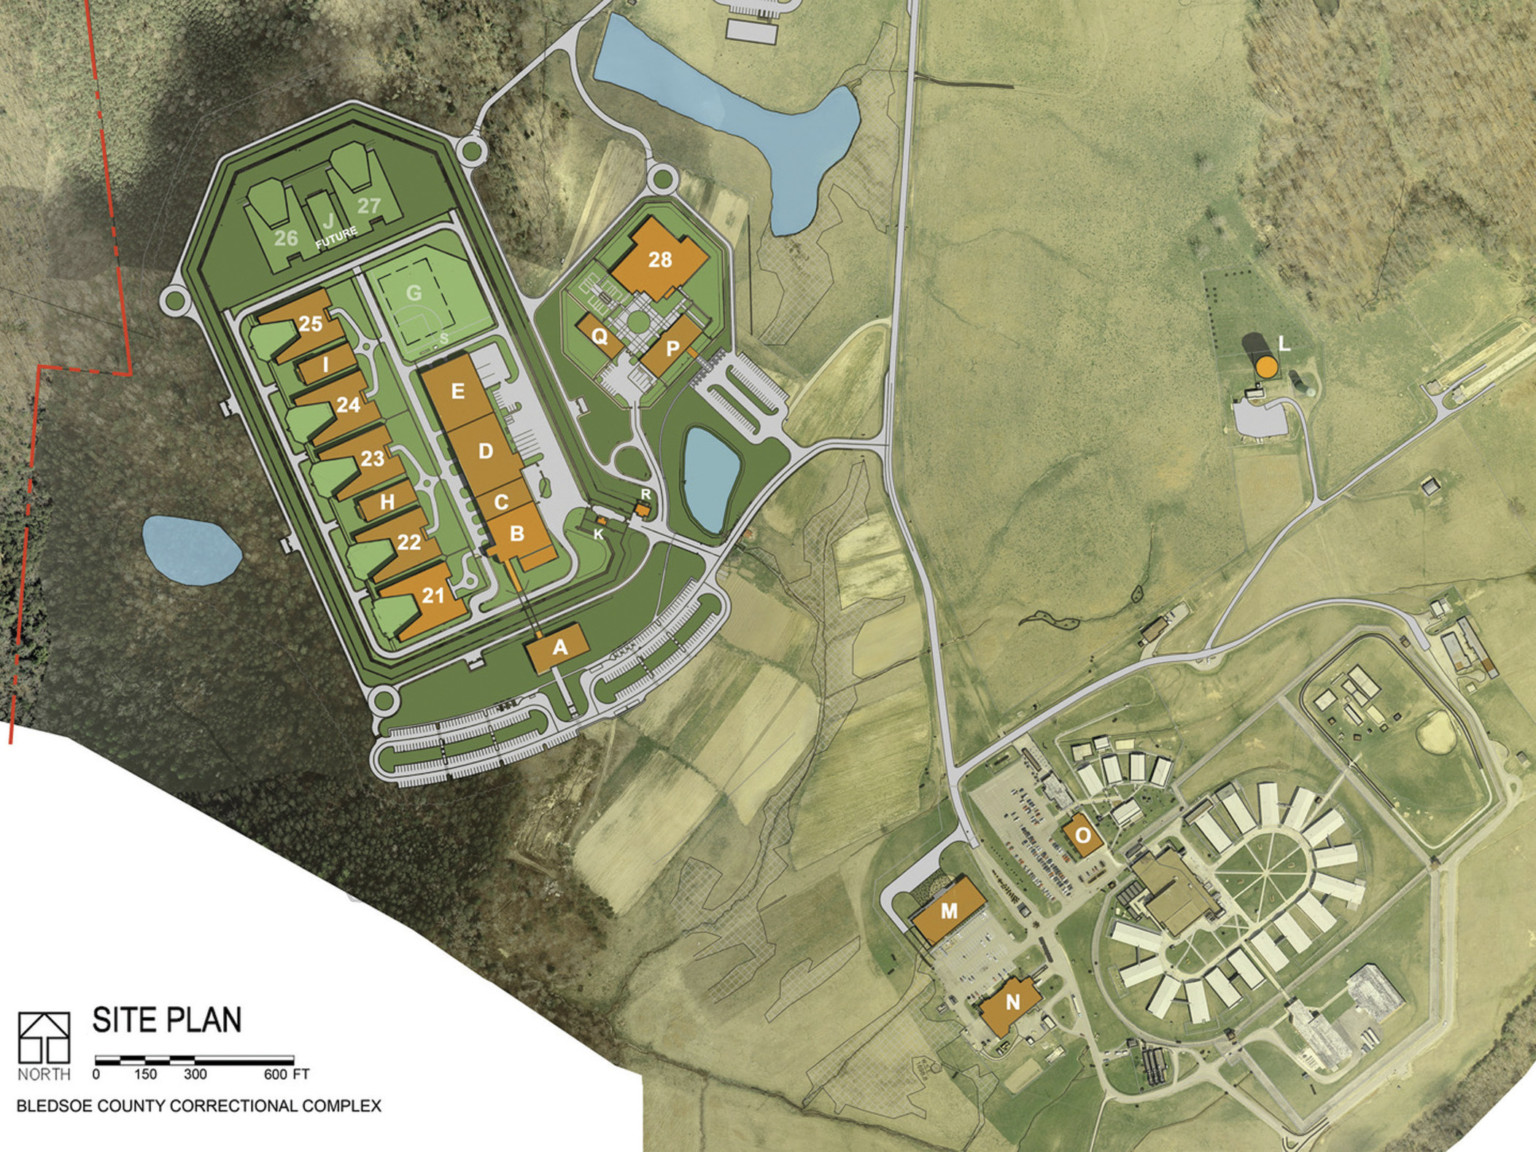 Rendering labeled Site Map with Bledsoe County Correctional Complex mapped on location with numbered and lettered labels